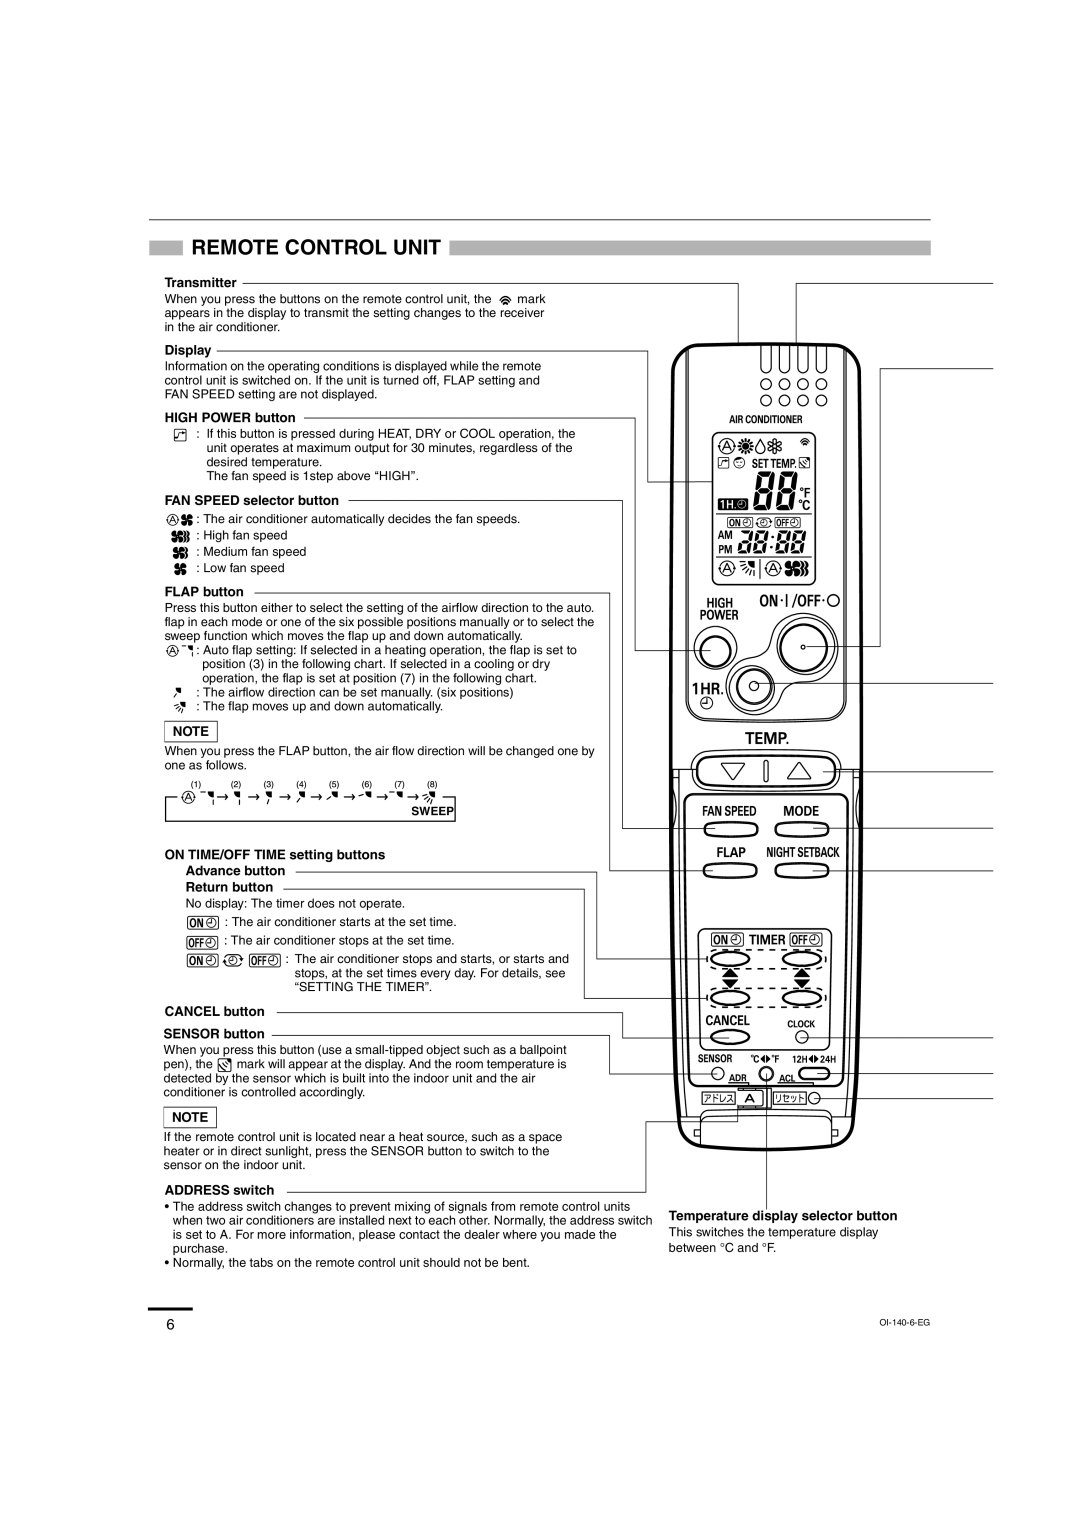 Sanyo XMHS1272 Remote Control Unit, Transmitter, Display, HIGH POWER button, FAN SPEED selector button, FLAP button 